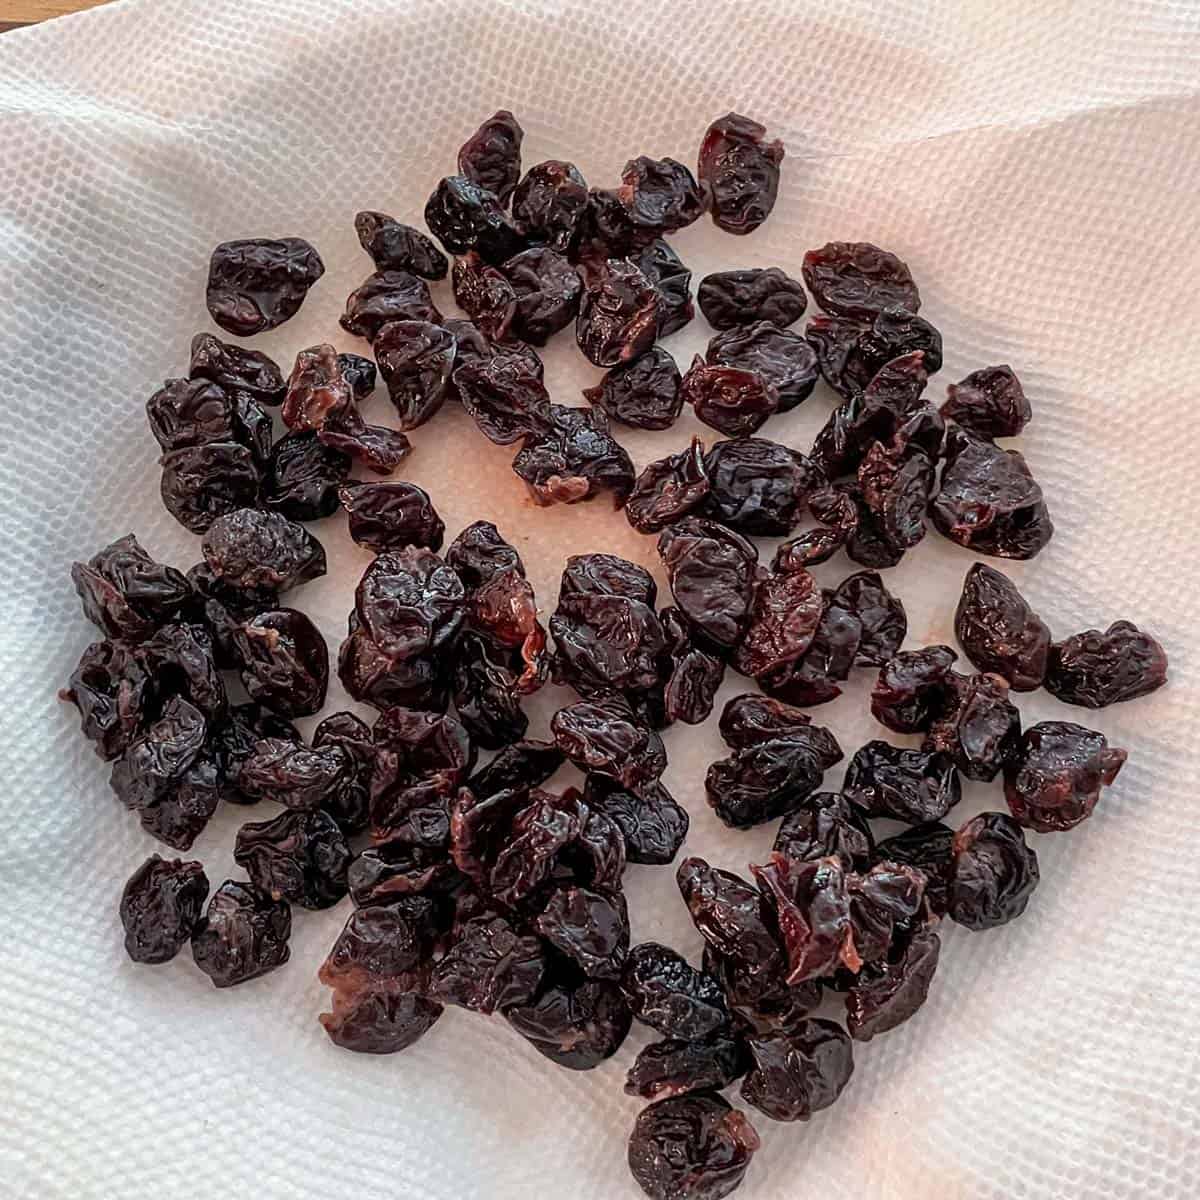 Infused dried cherries laying on a paper towel to absorb the liquid.